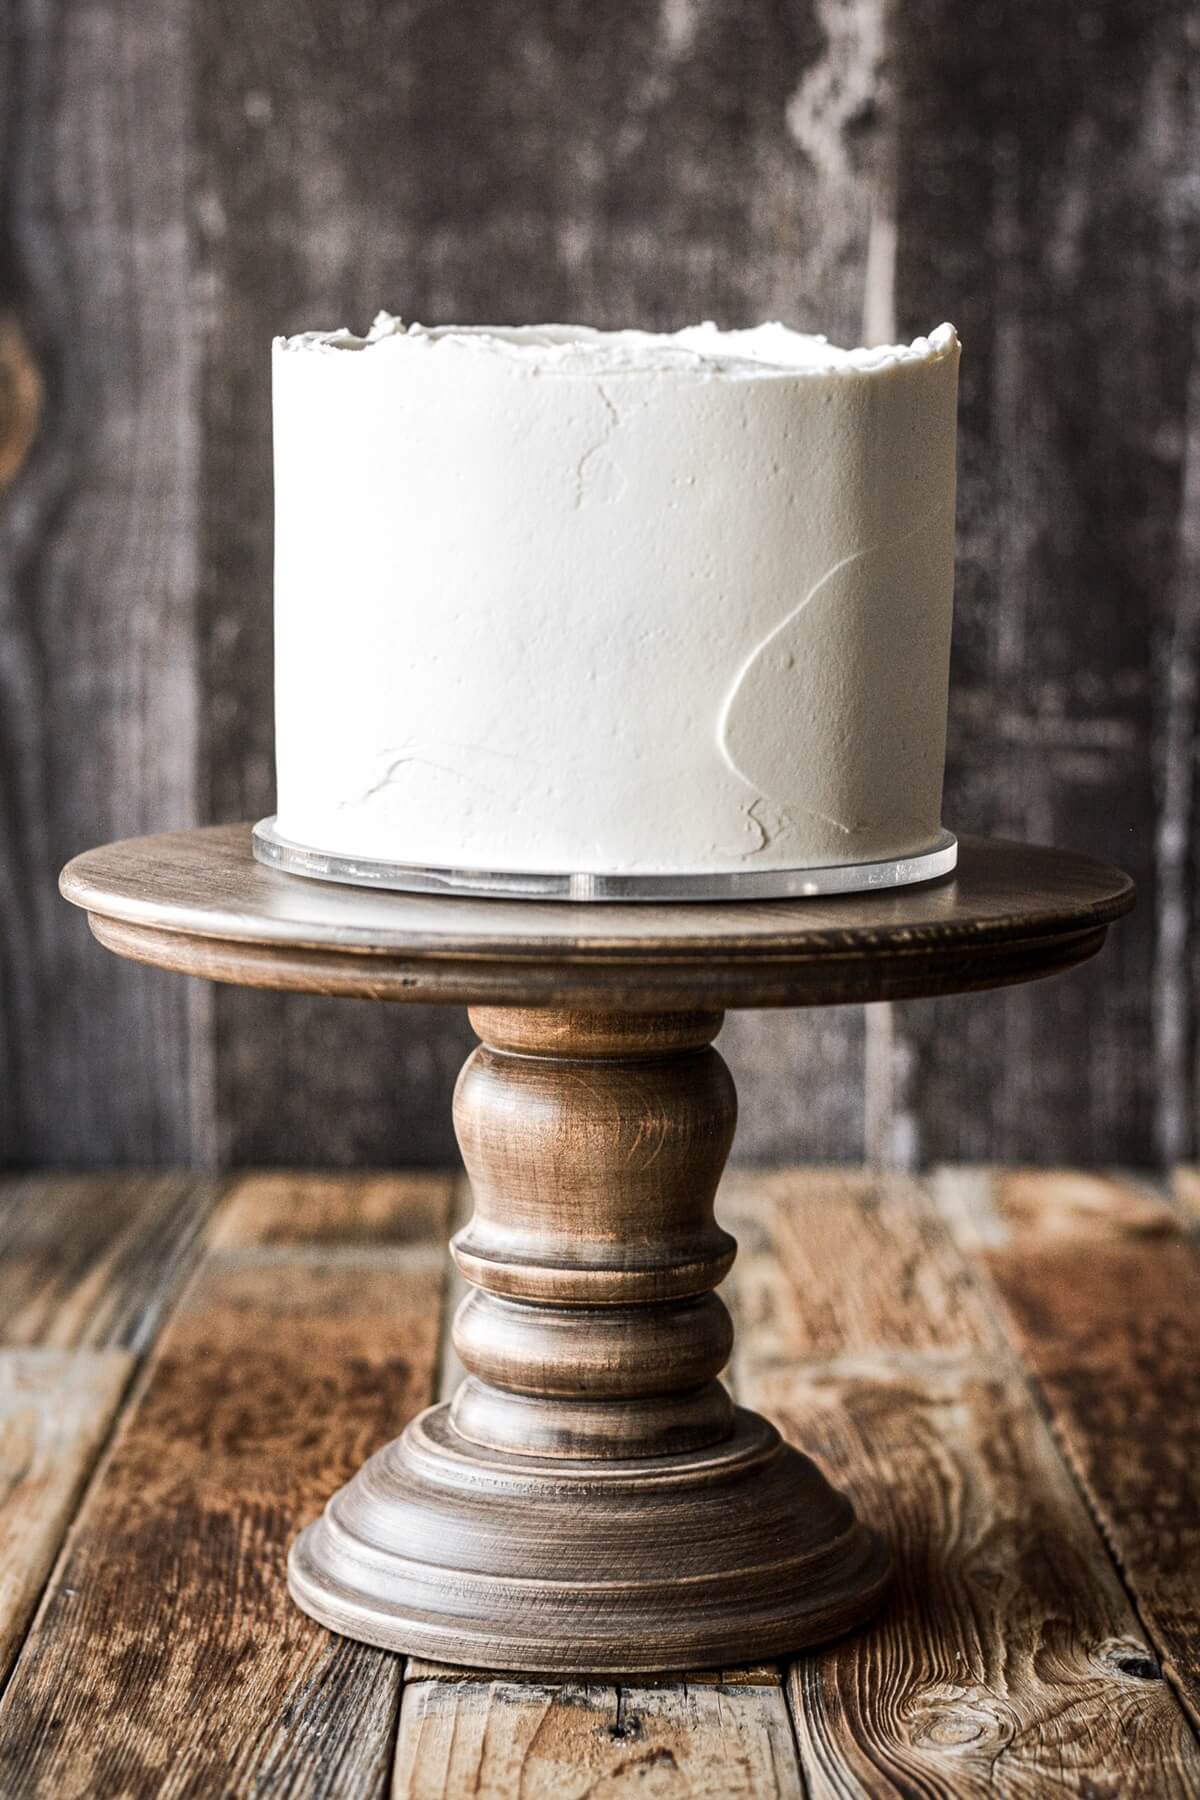 Vanilla buttercream frosted cake on a wooden cake stand.